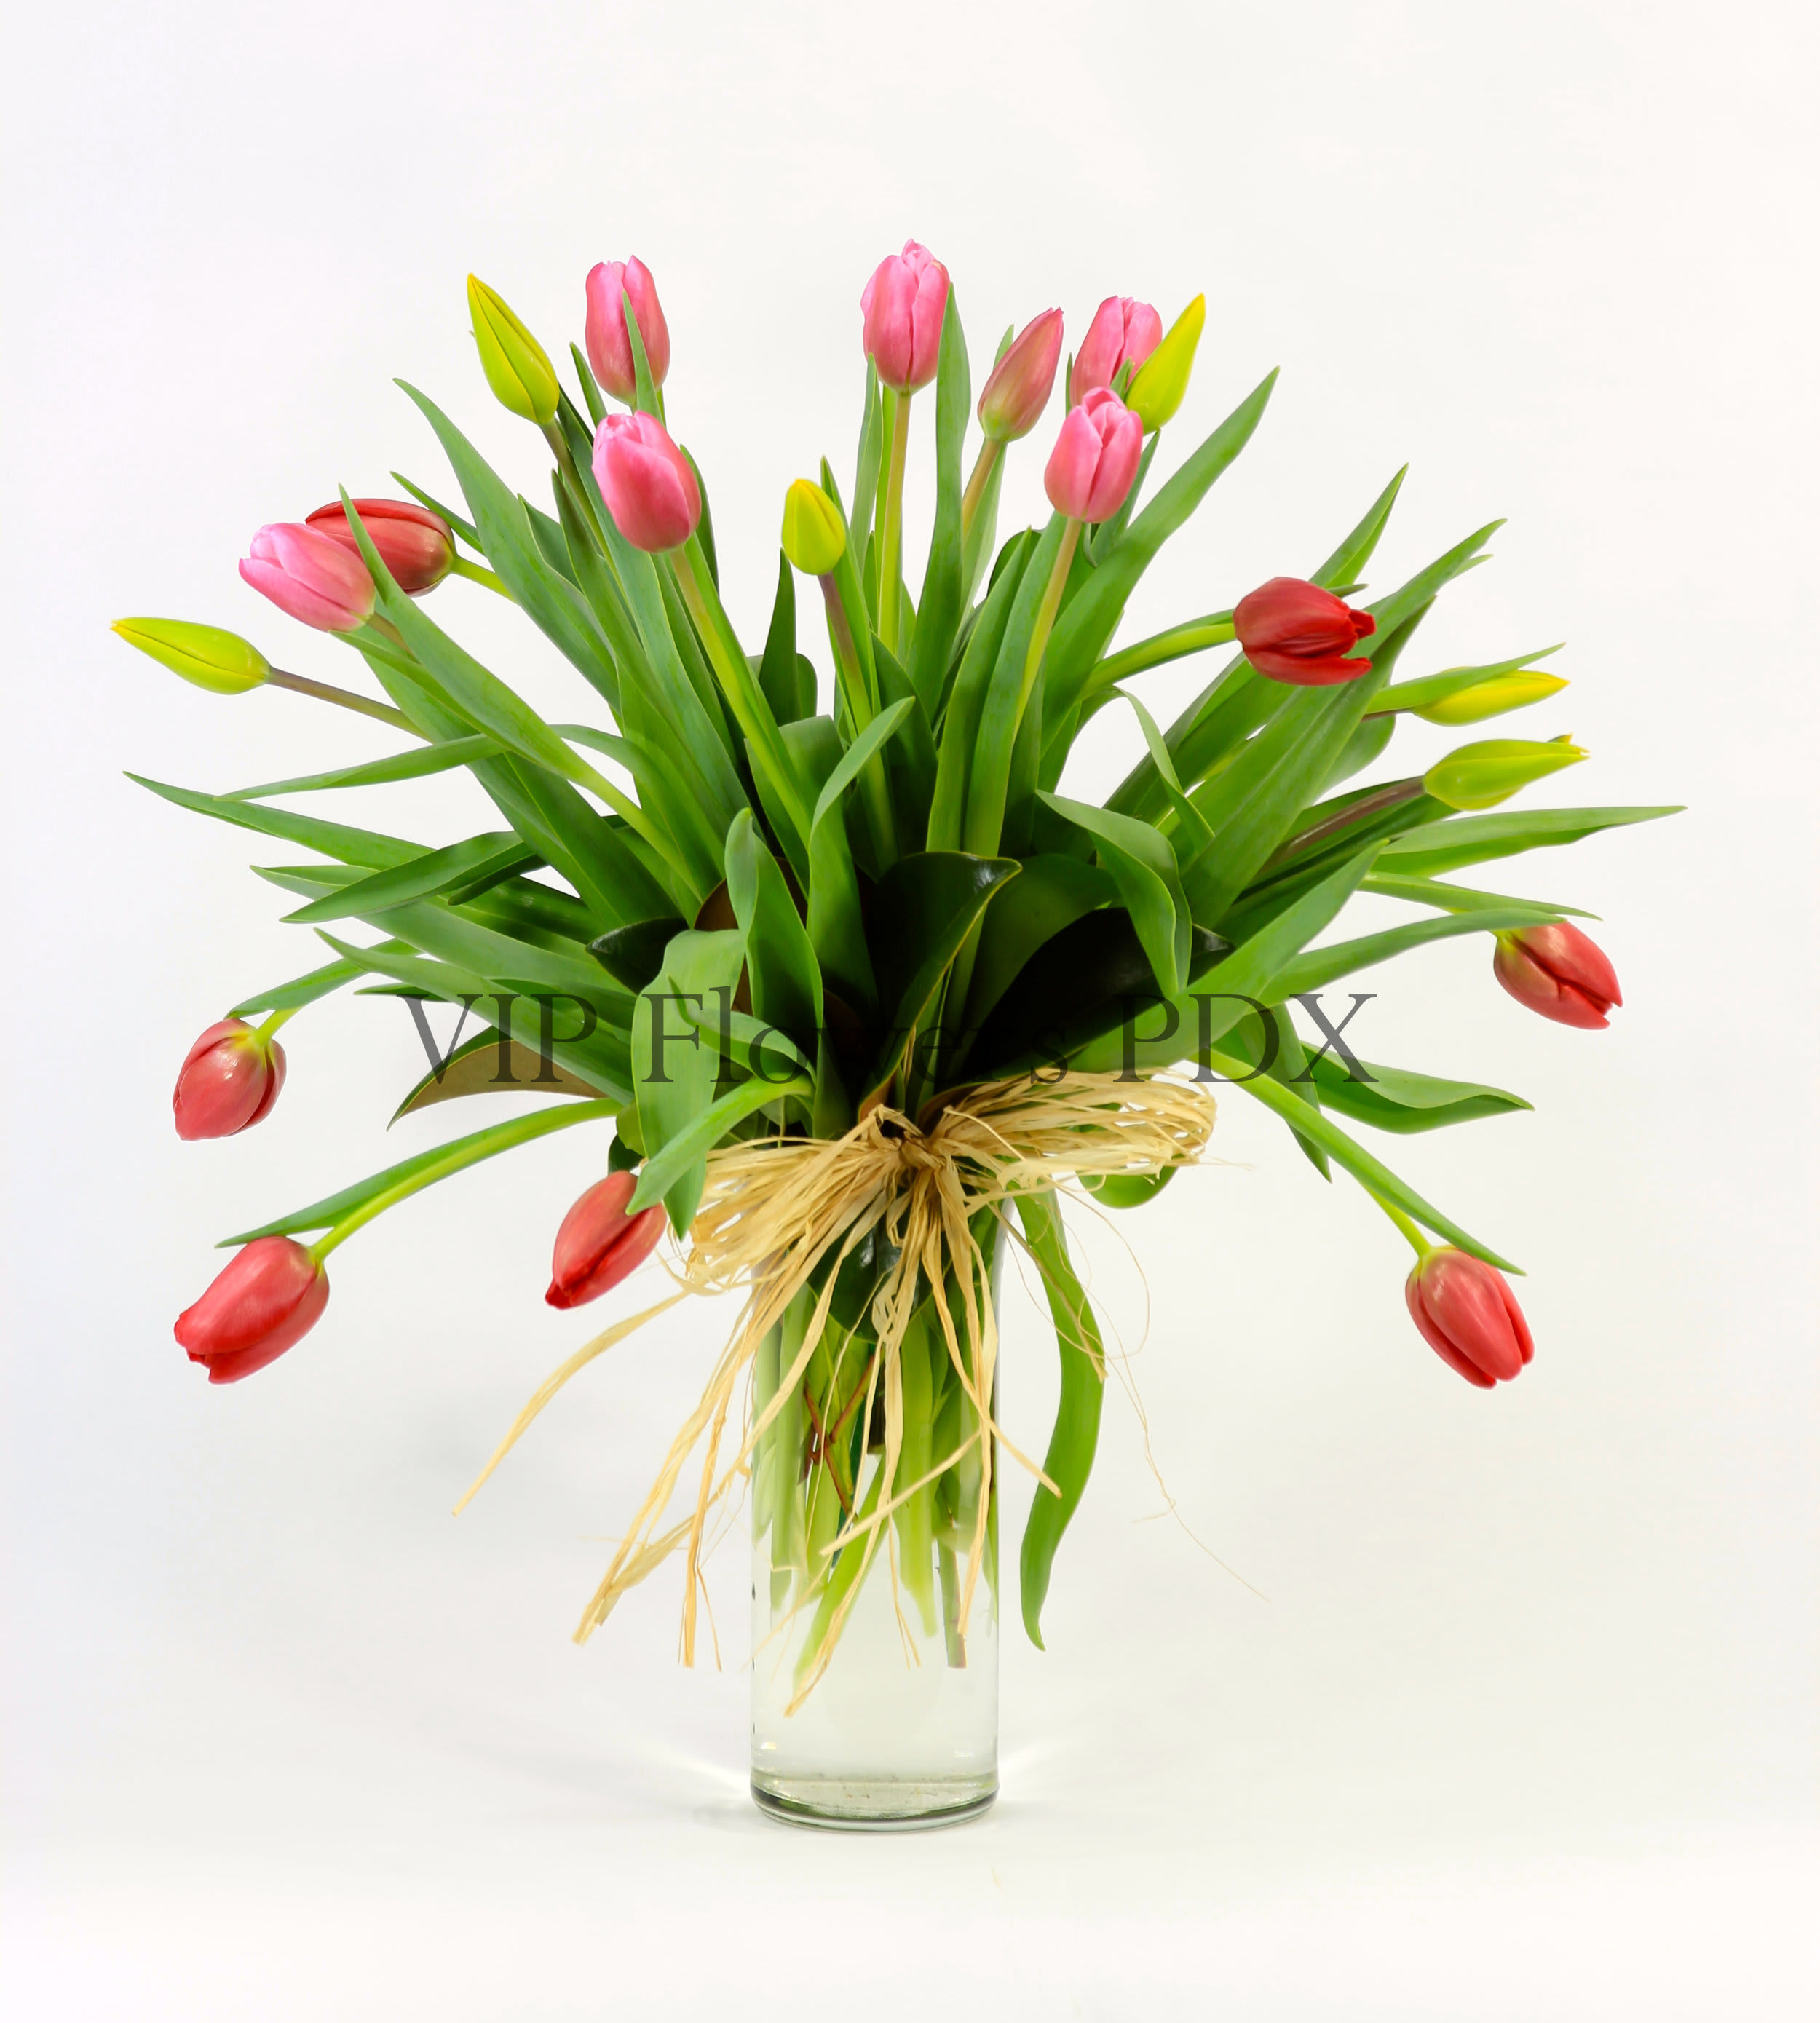 Tulip Delight - Substitutions may be necessary to ensure your arrangement or specialty gift is delivered in a timely manner. The utmost care and attention is given to your order to ensure that it is as similar as possible to the requested item (Please note that some flowers and colors may vary due to seasonality.)